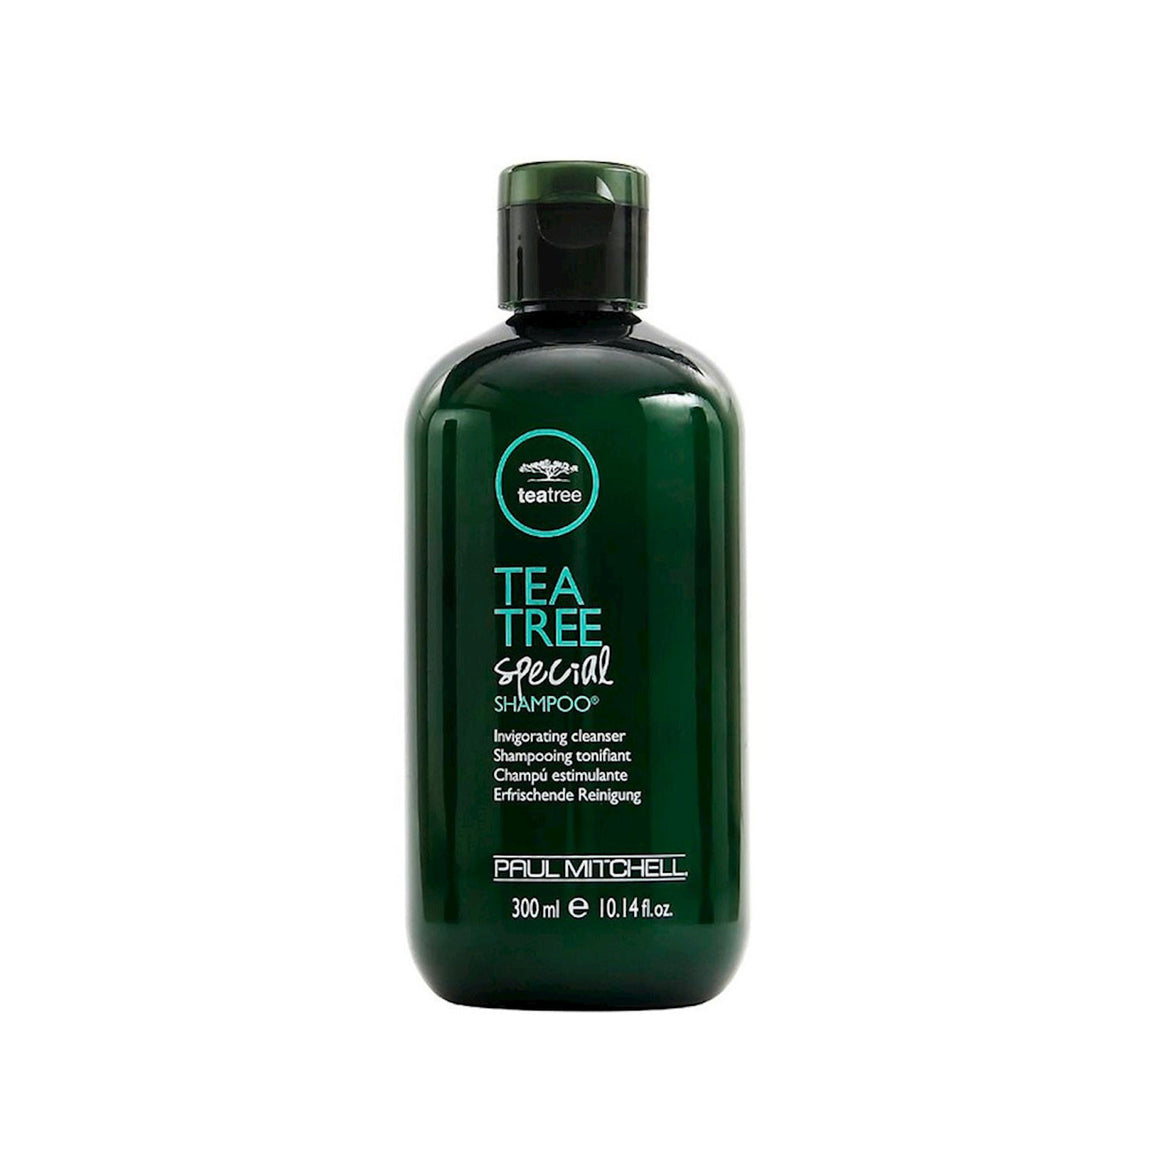 Paul Mitchell - Shampooing (Tea Tree Special) - 300ml